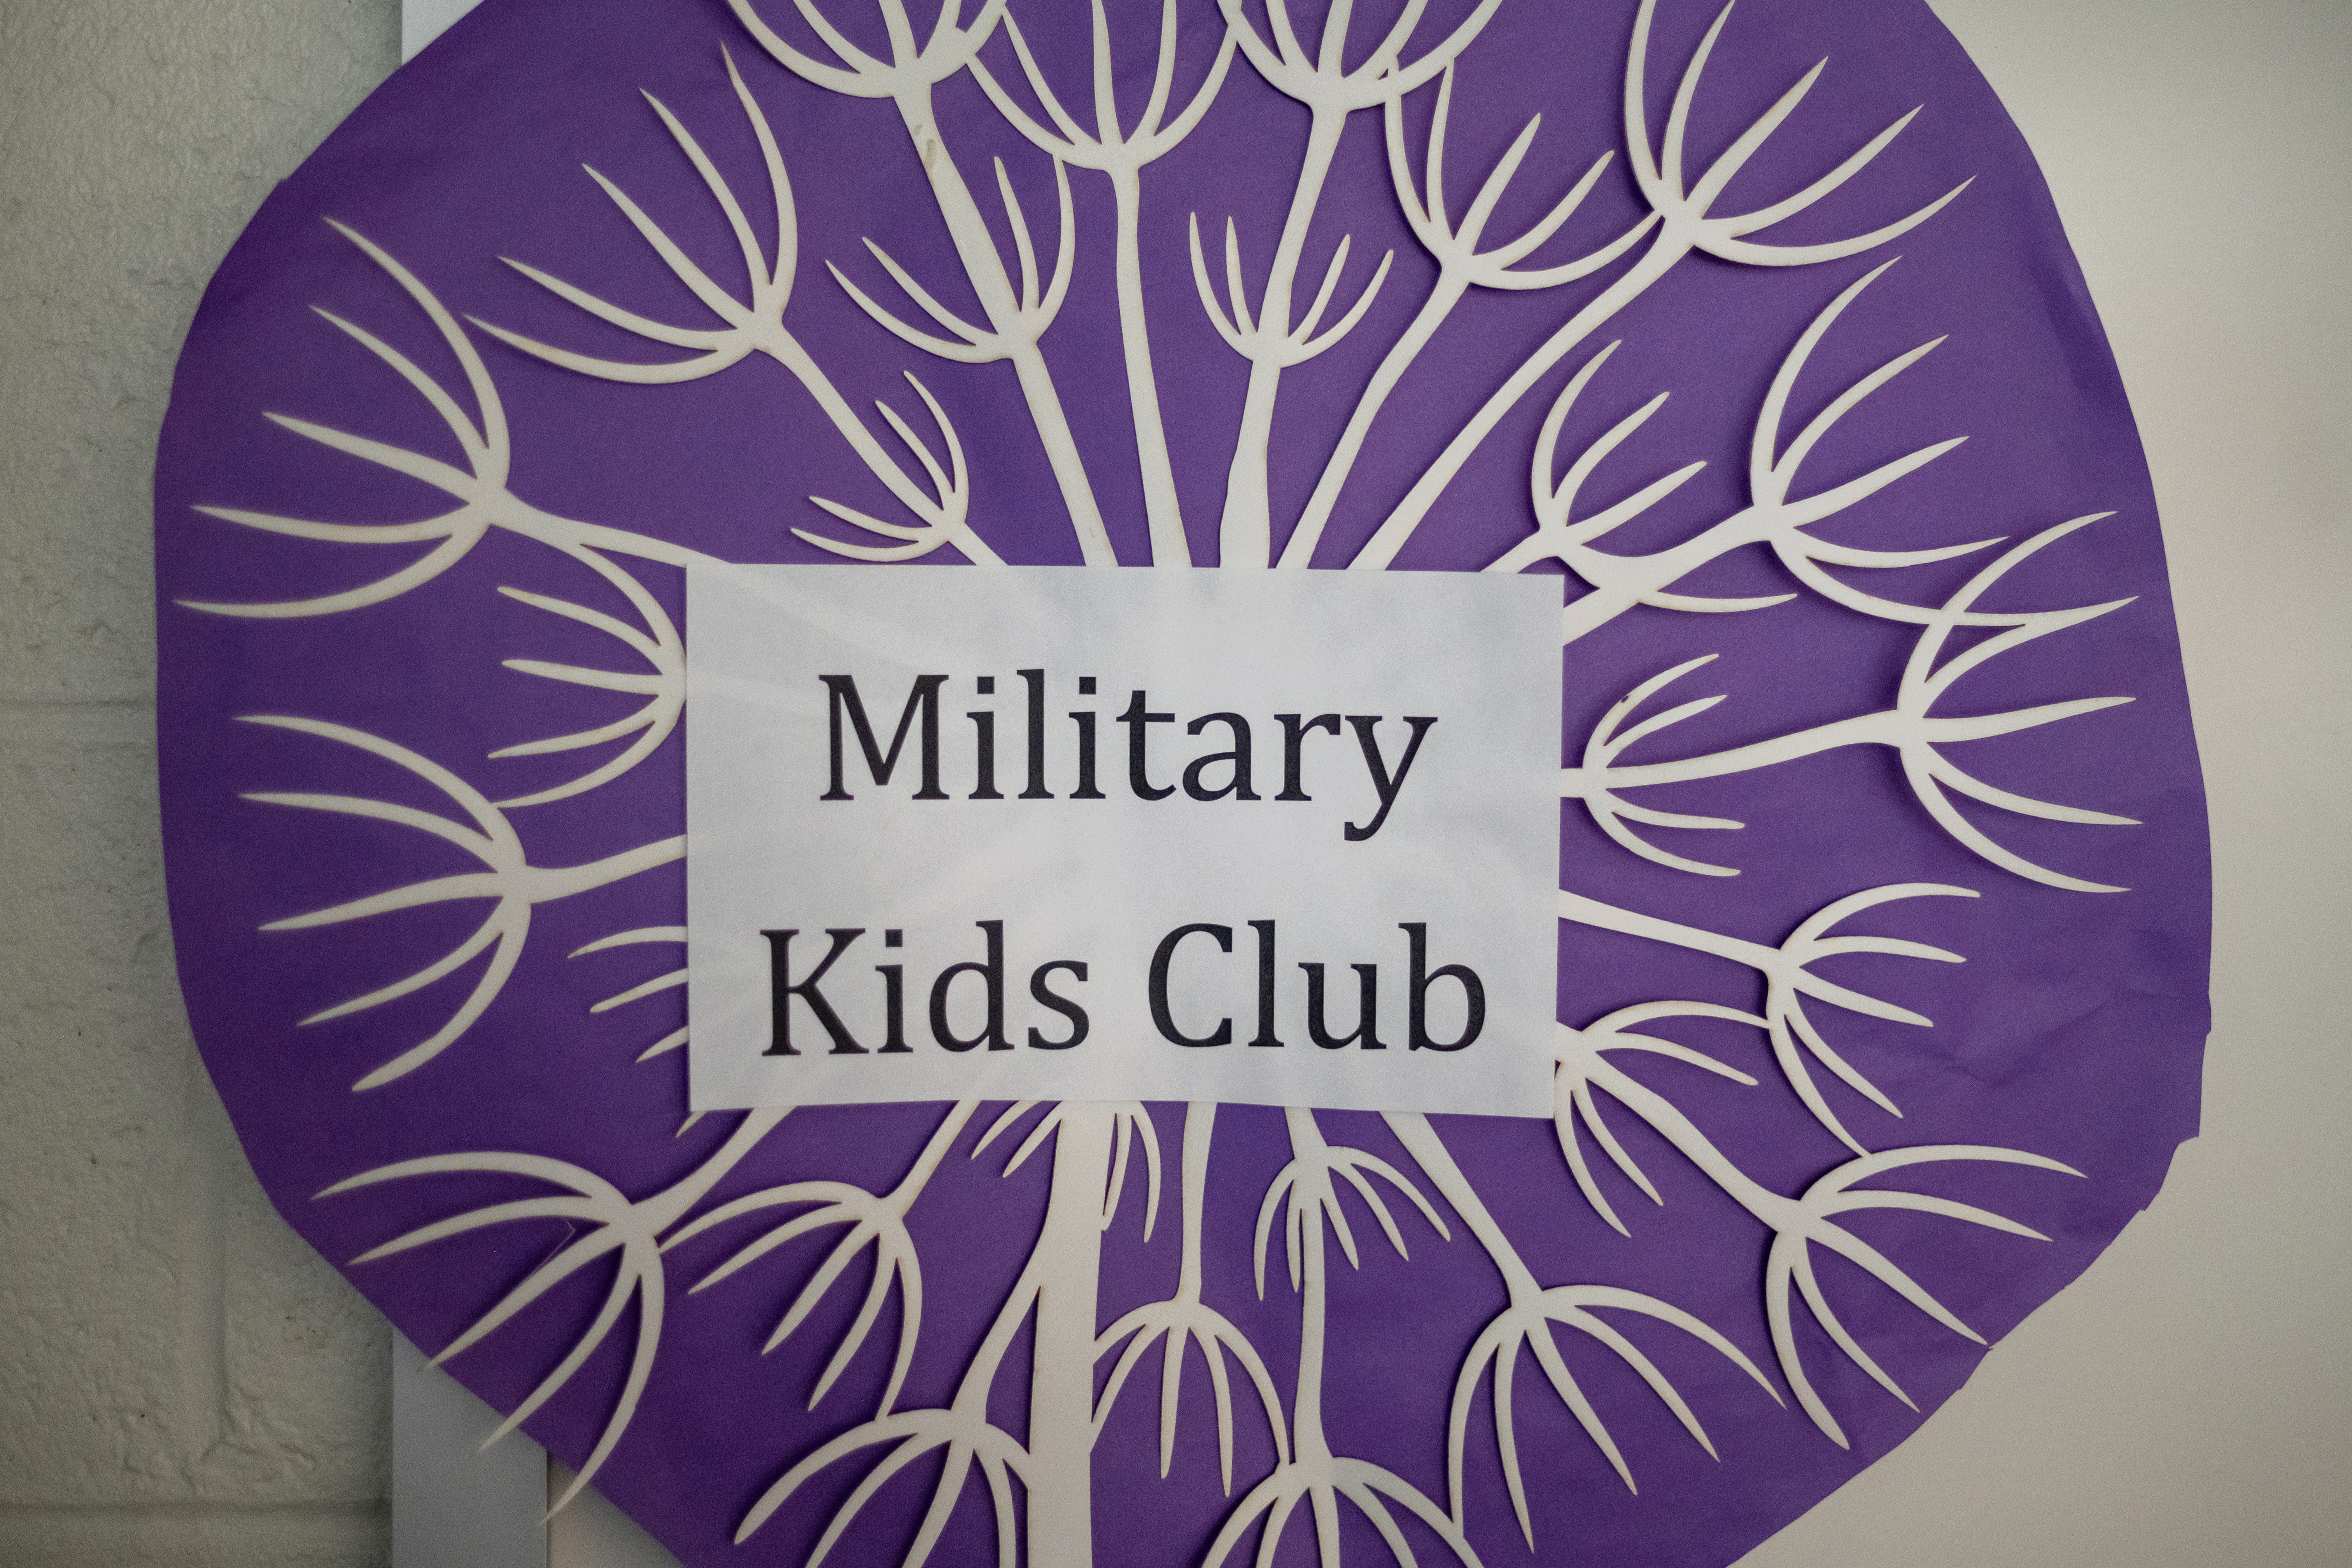 A sign at Clermont Elementary for the Purple Star School's Military Kids Club.